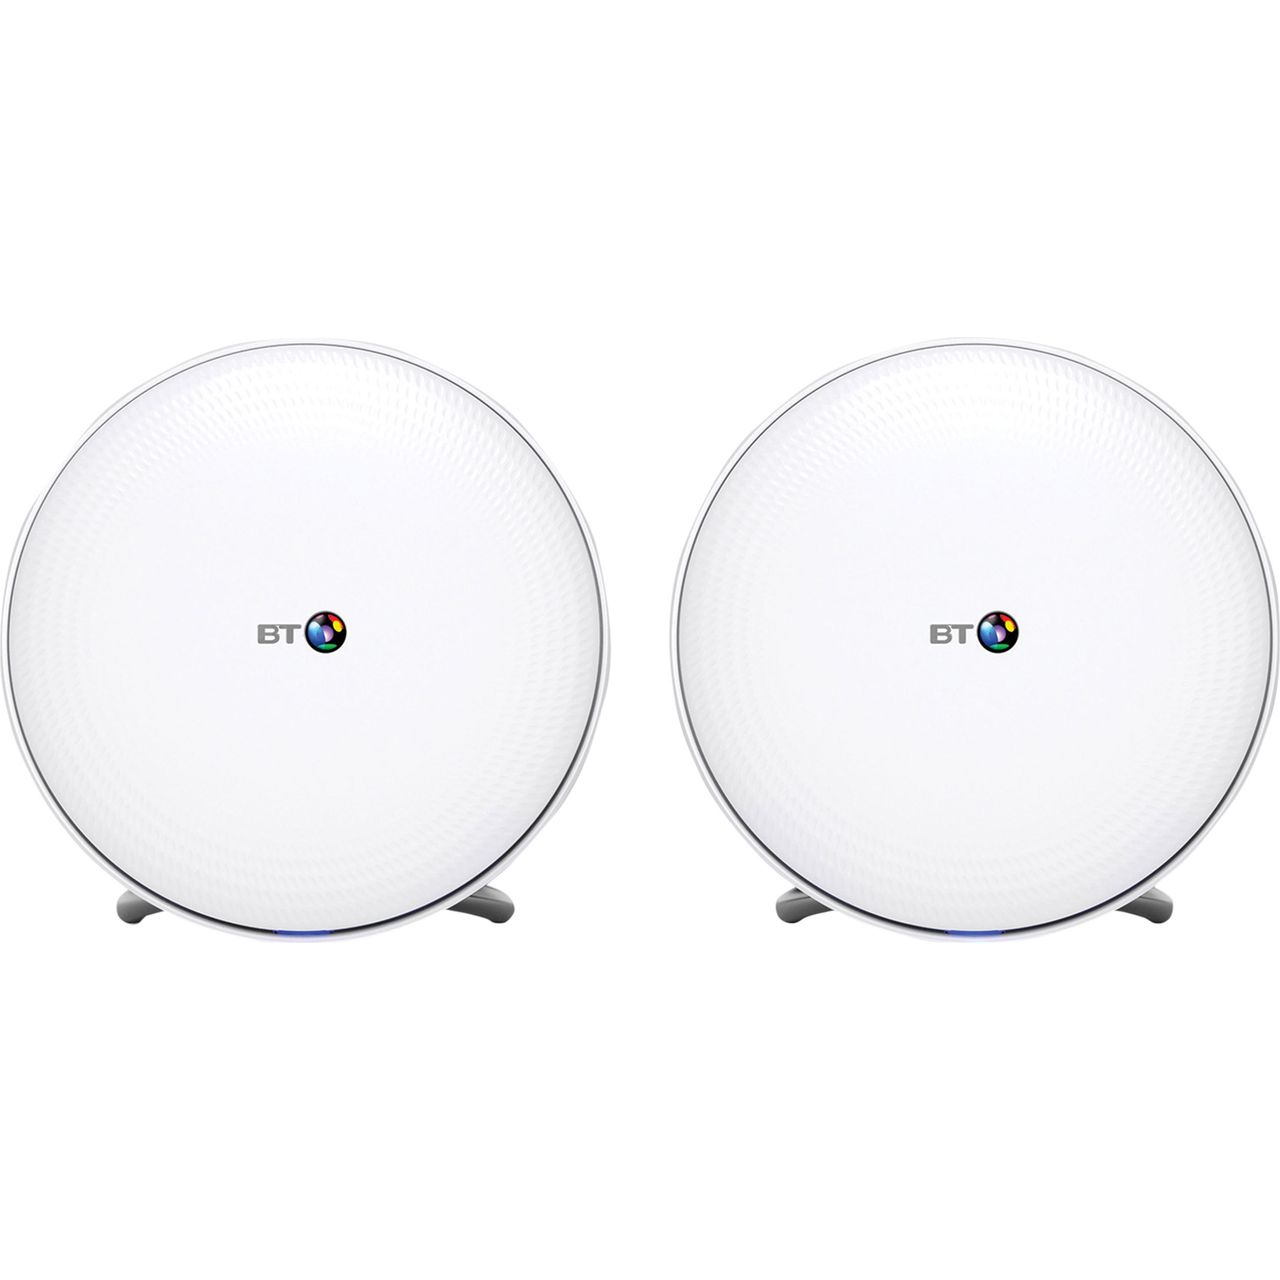 BT Whole Home WiFi (2-Pack) for Mesh Network Review